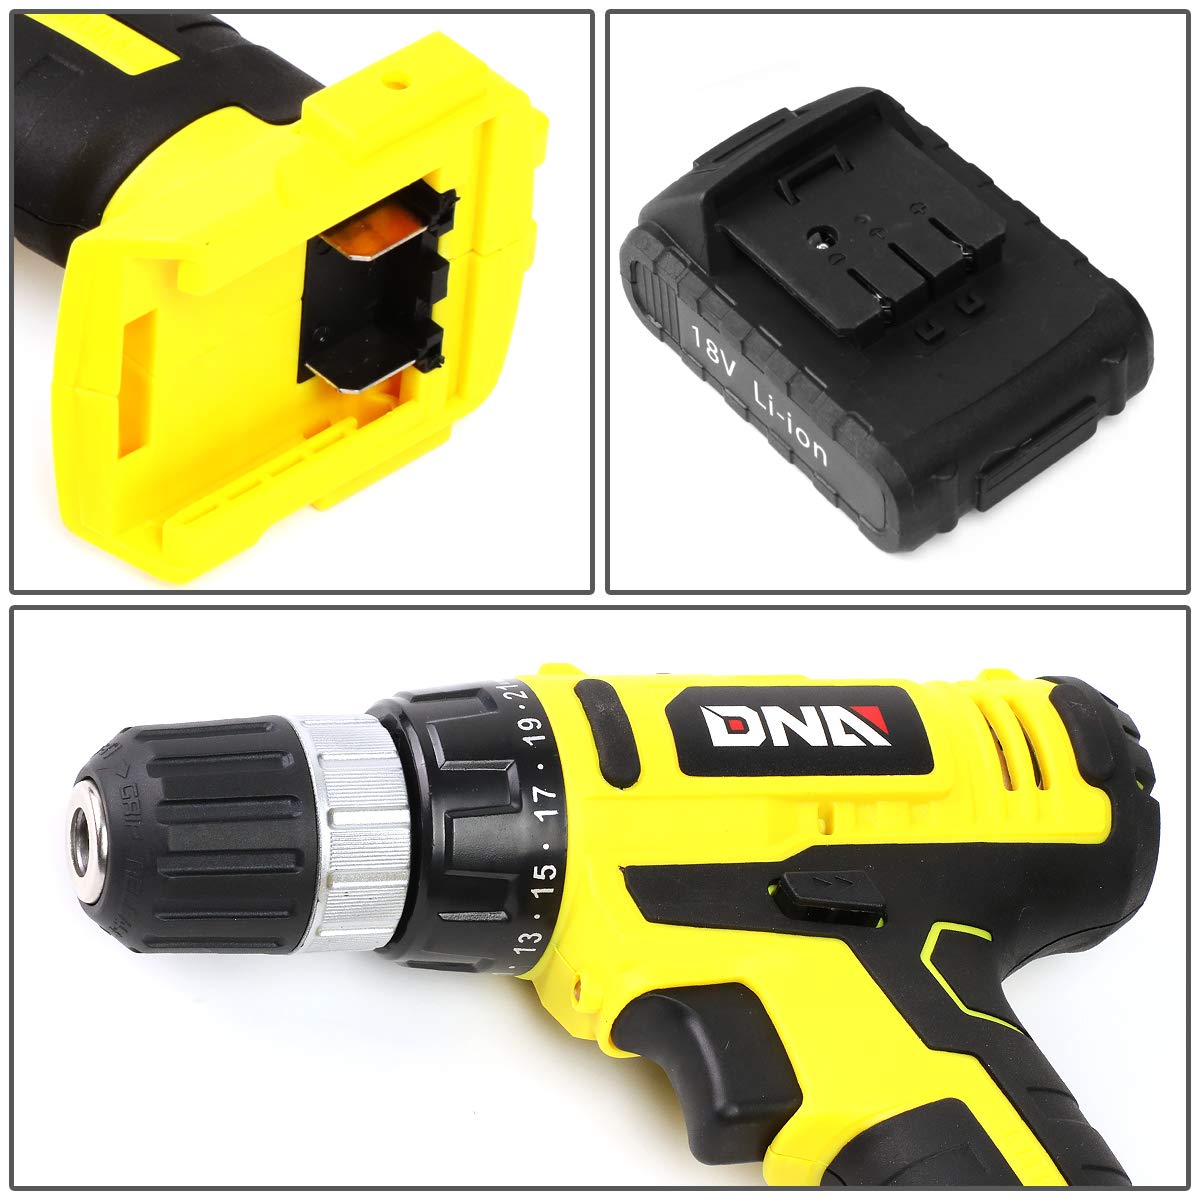 DNA MOTORING TOOLS-00019 Yellow 46 PCs 18V Cordless Drill Driver Bit Set w/Charger+Screwdrivers+Pliers Home/Offic Repair Kit